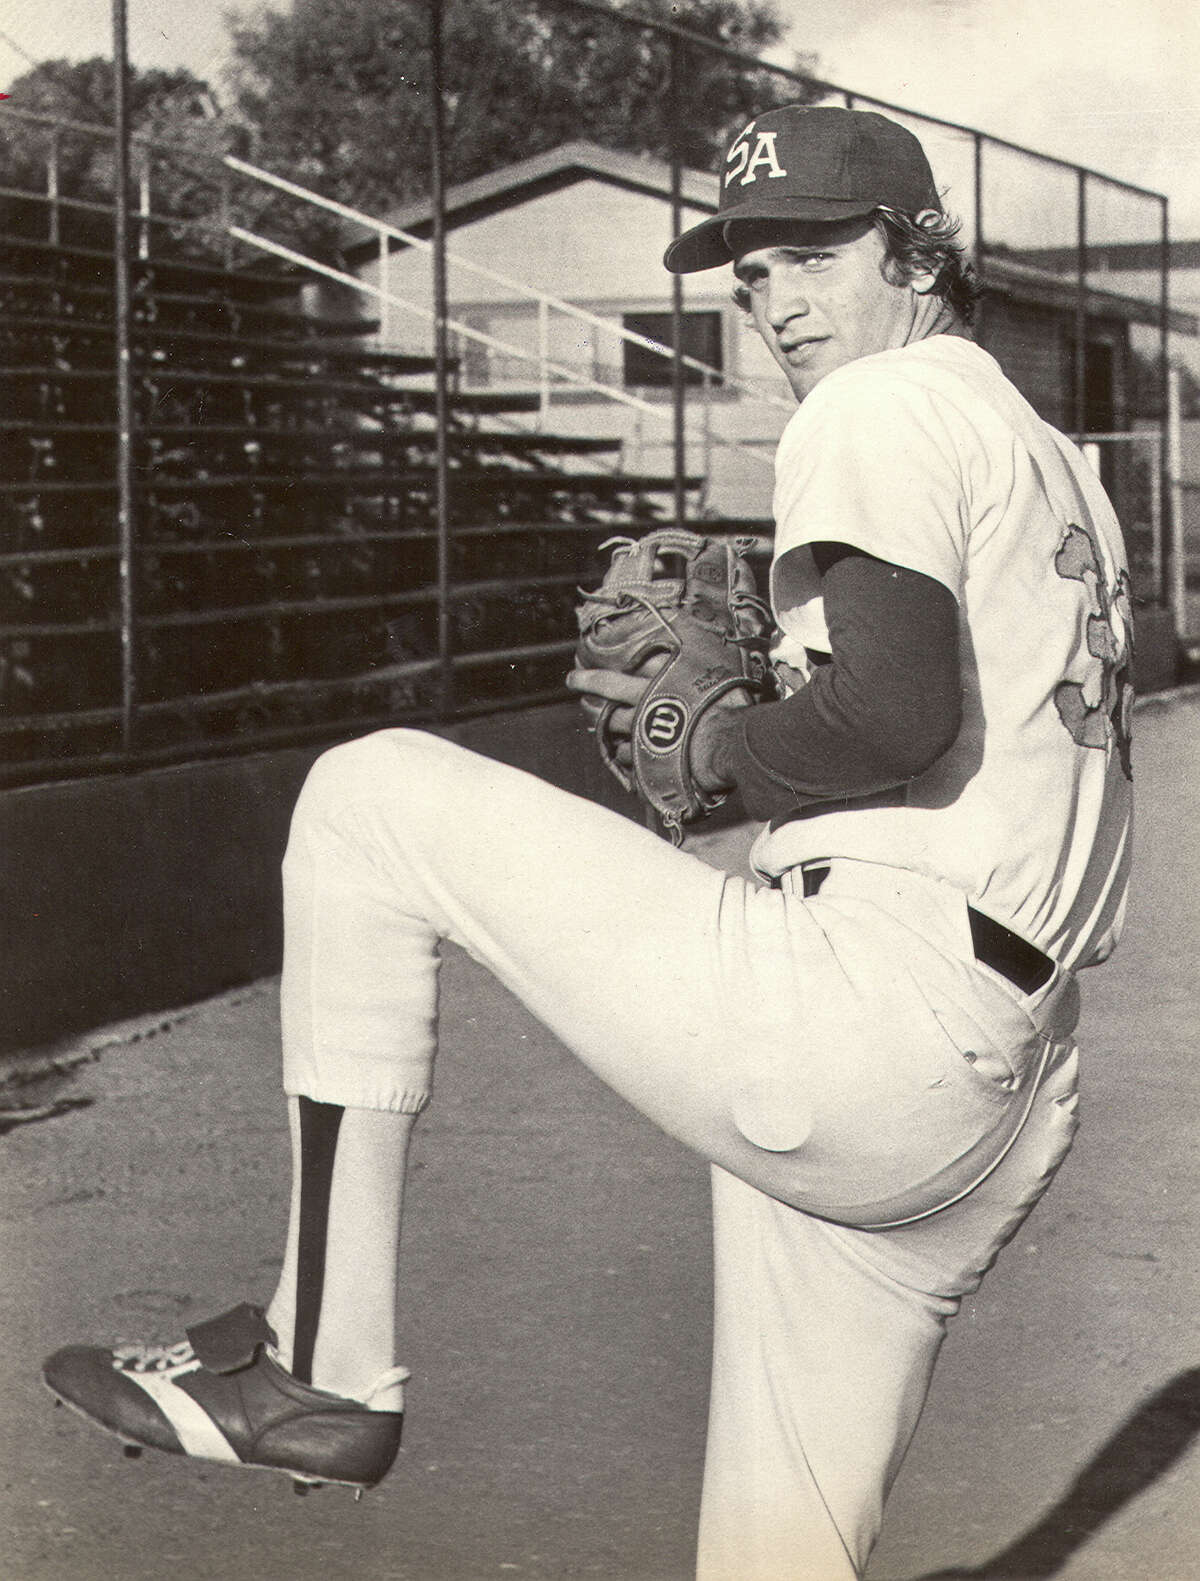 Bob Welch made his pro debut with the San Antonio Dodgers in 1977 after being a first-round draft pick out of Eastern Michigan University.